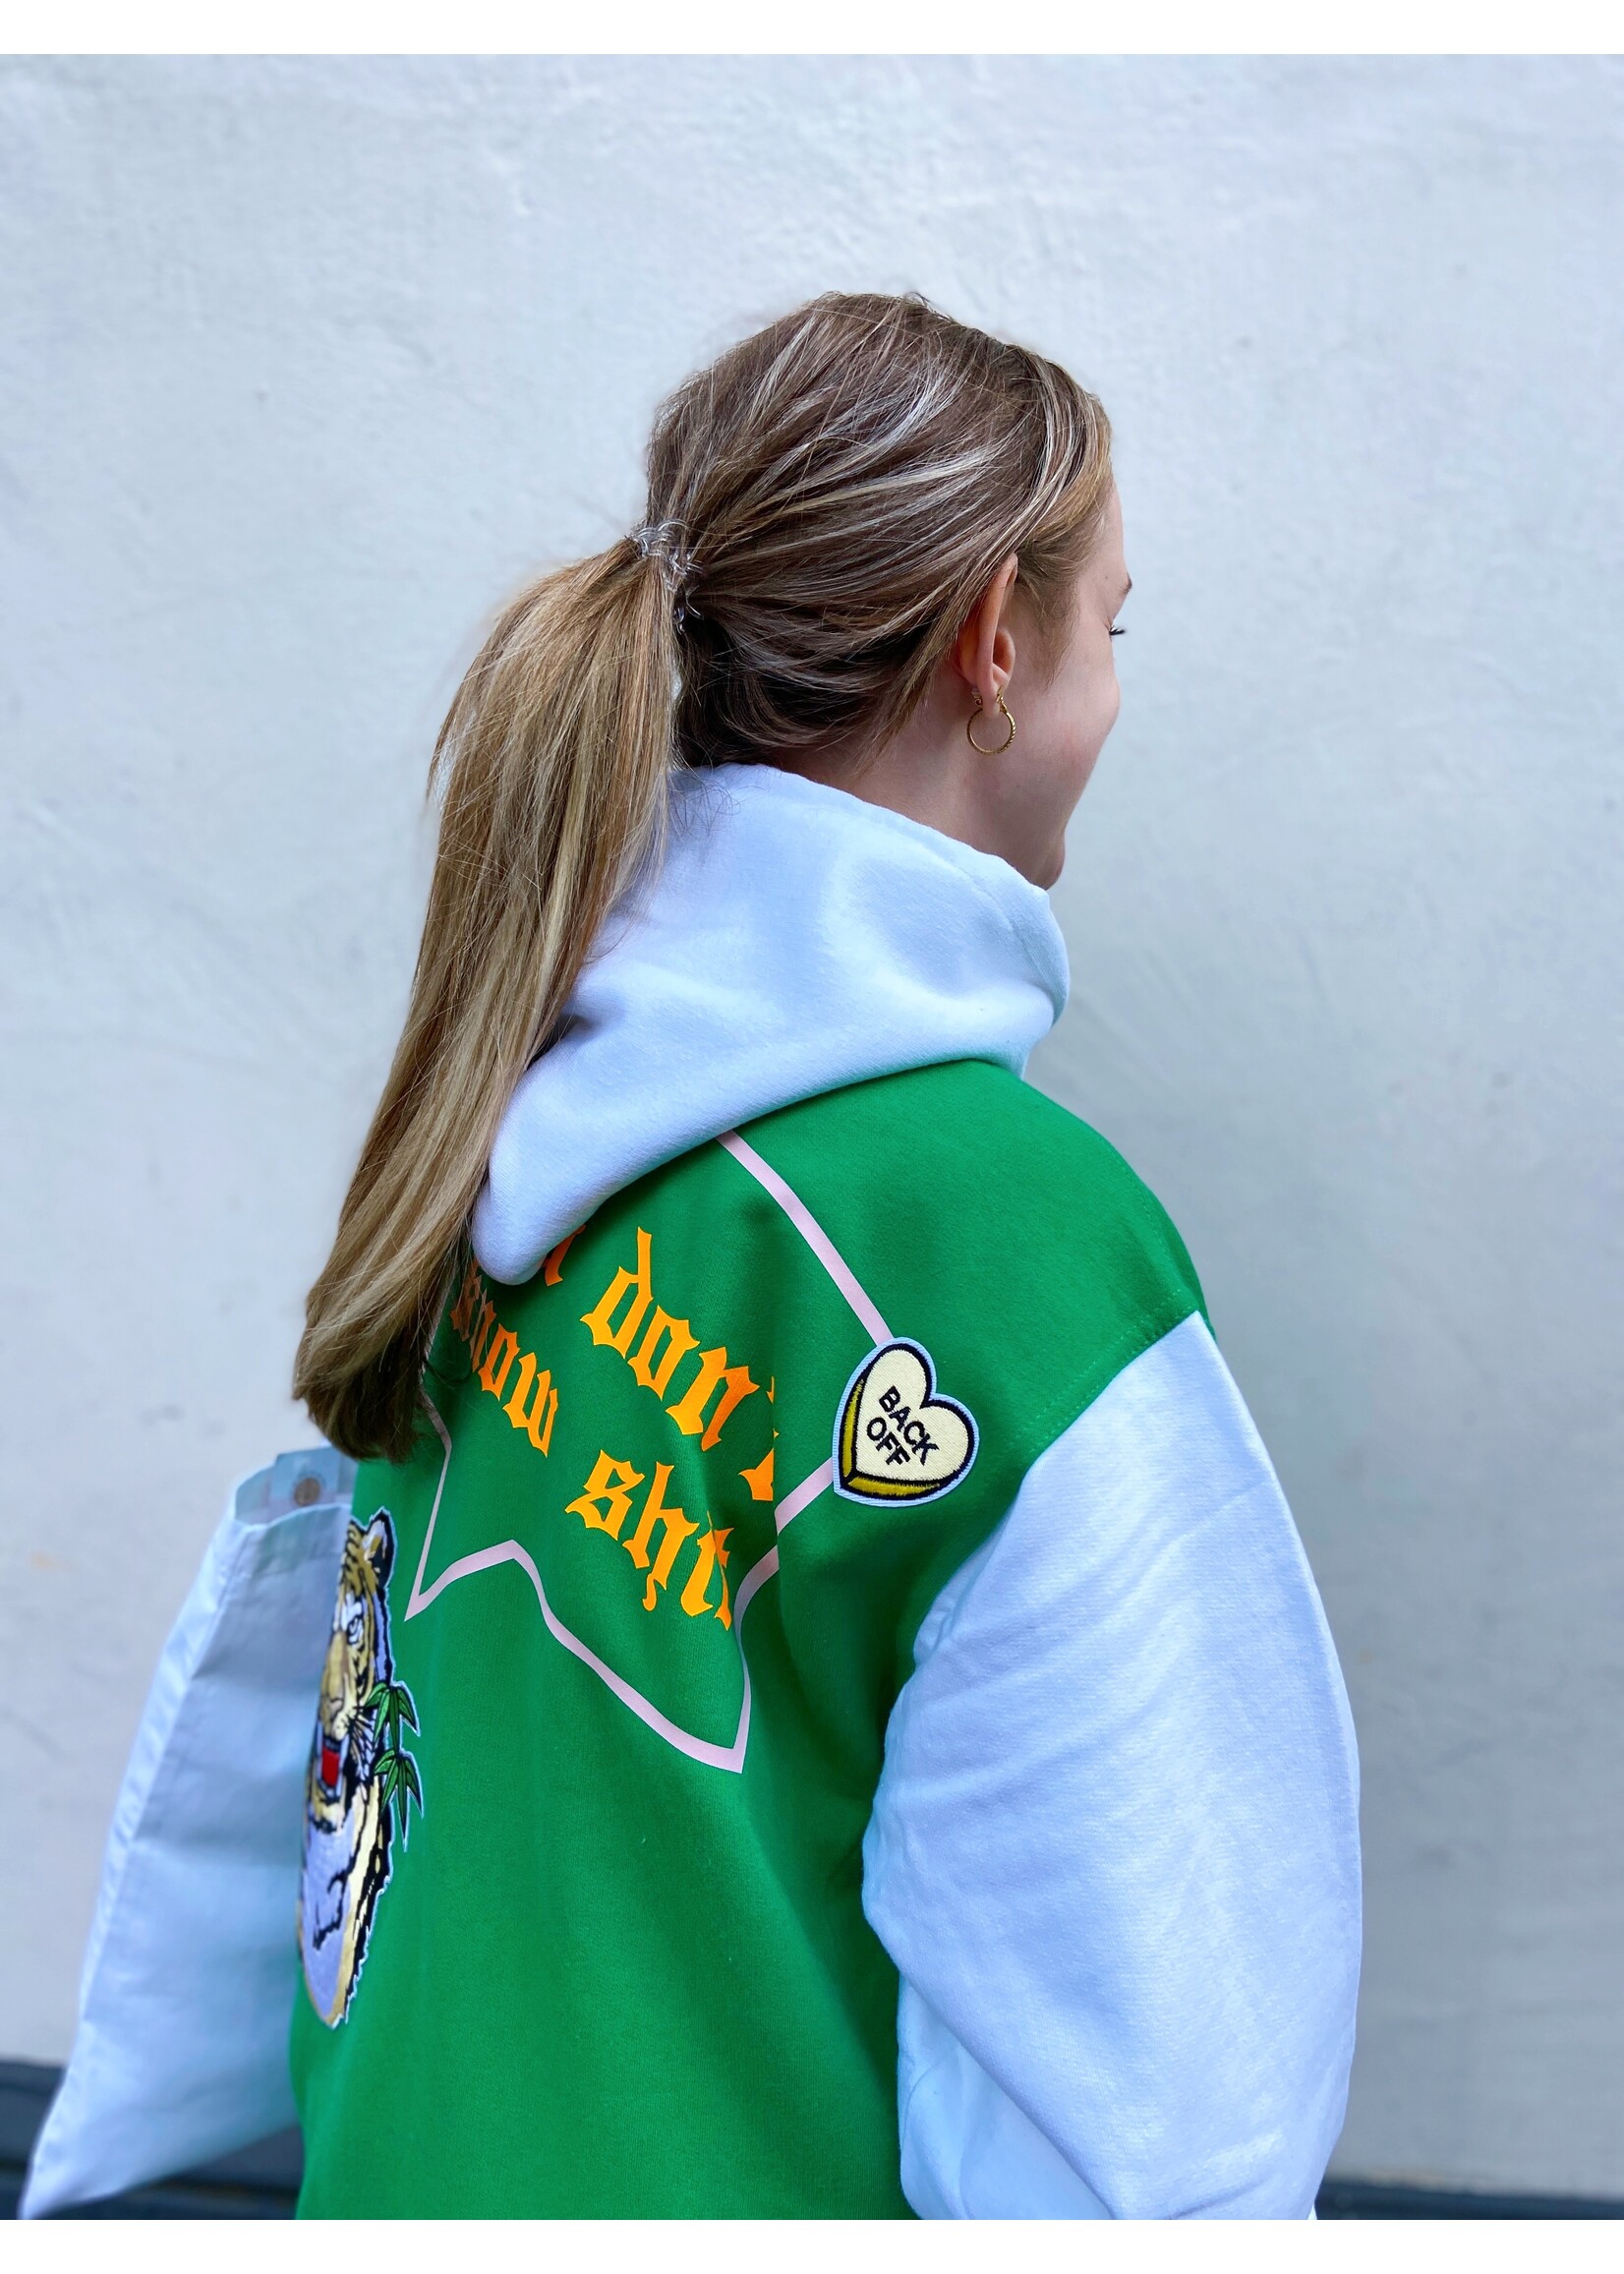 YOU ARE SPECIAL ''Property of no one'' Green Baseball Jacket